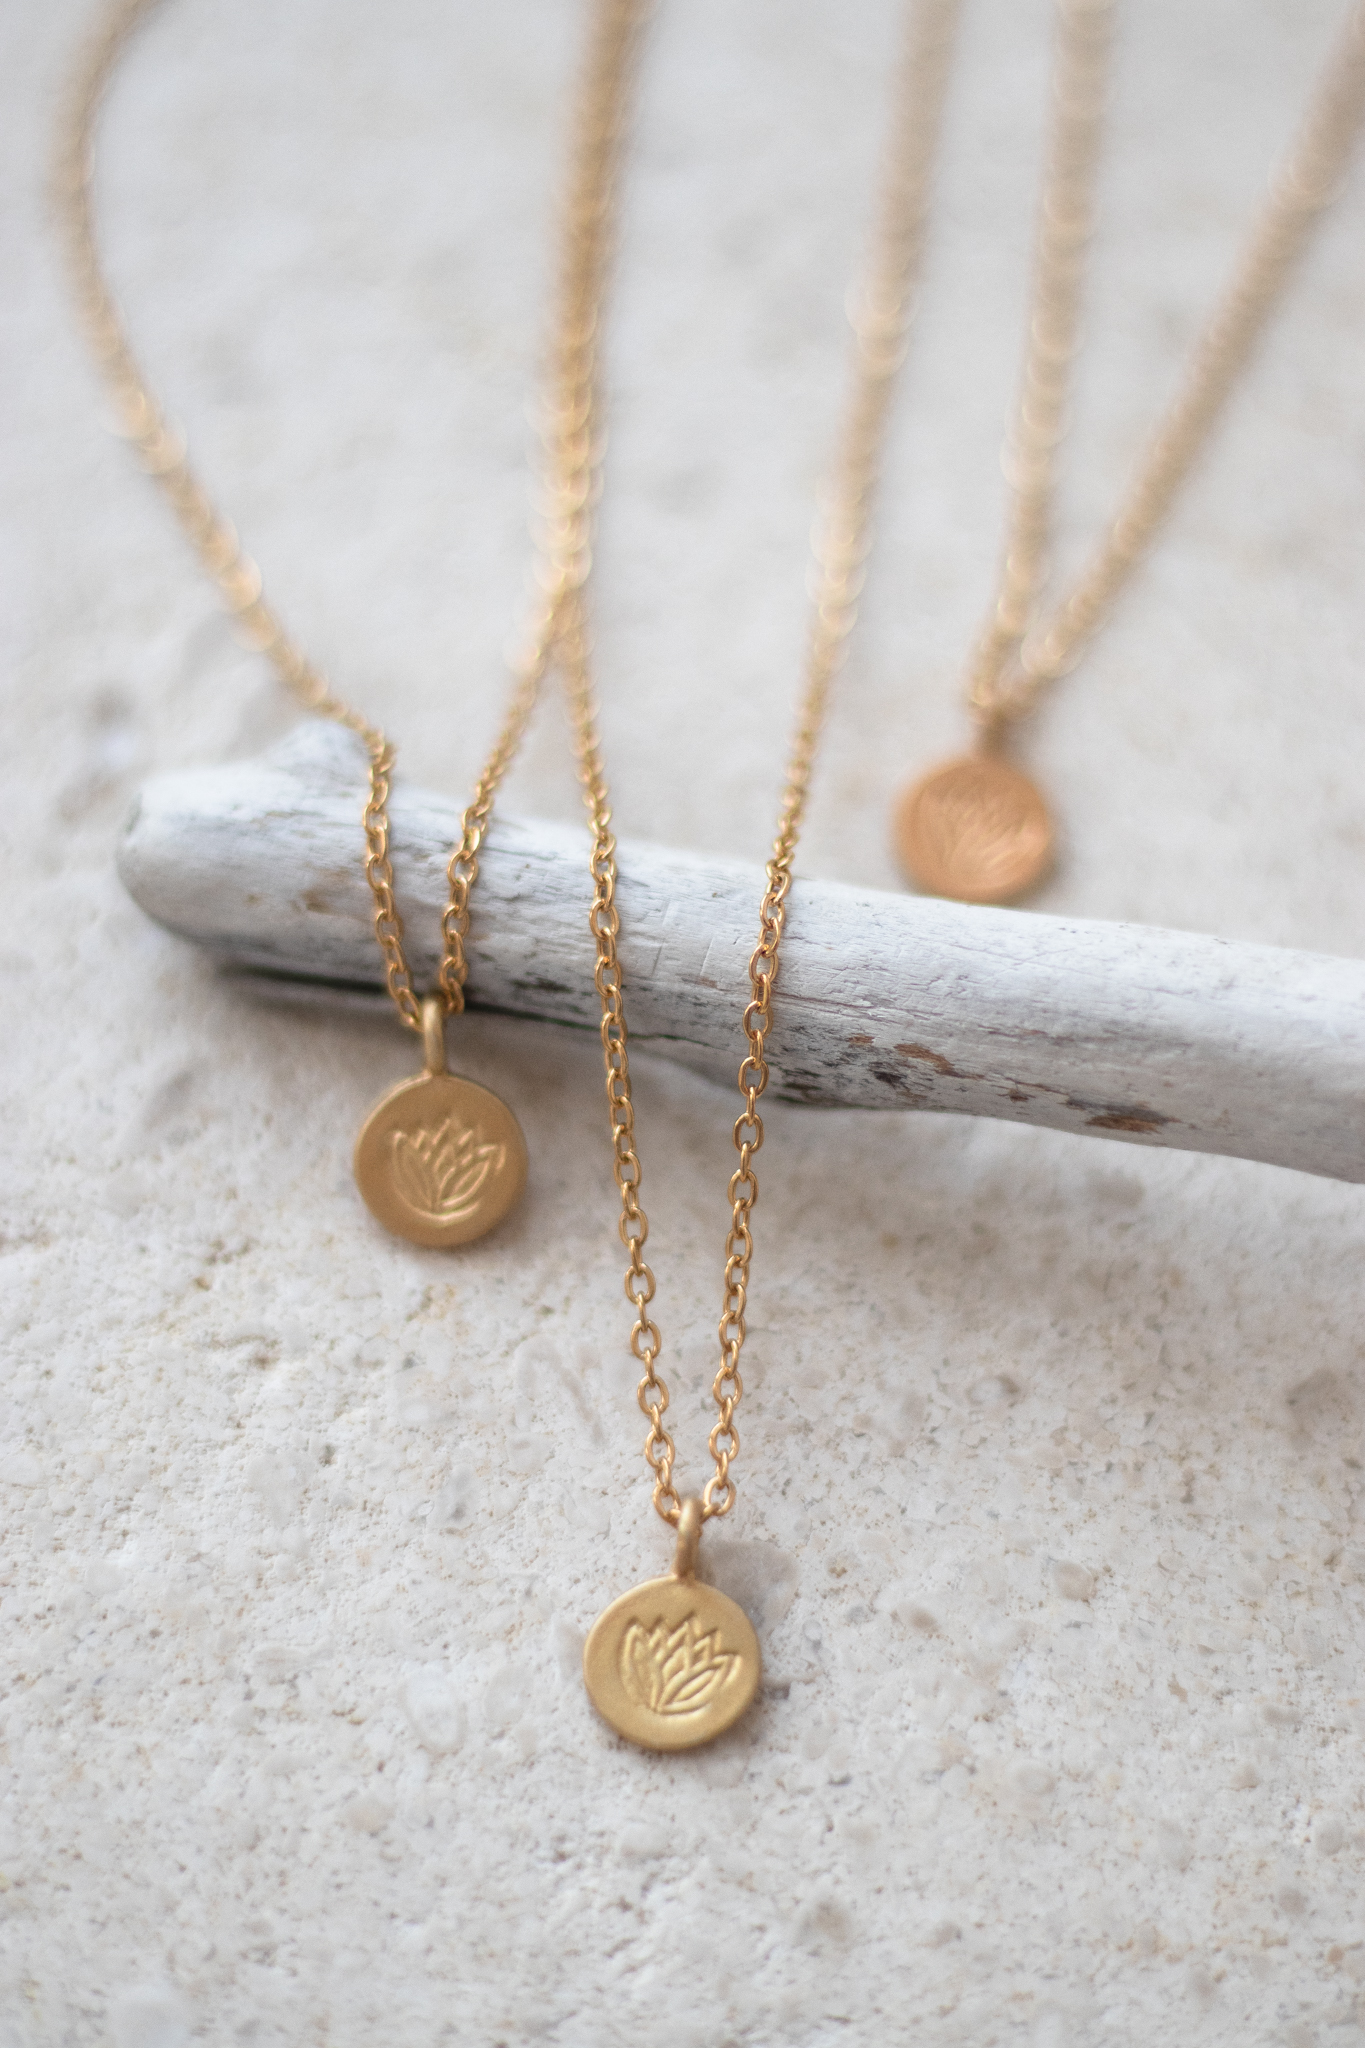 Necklace in gold with a dainty lotus pendant